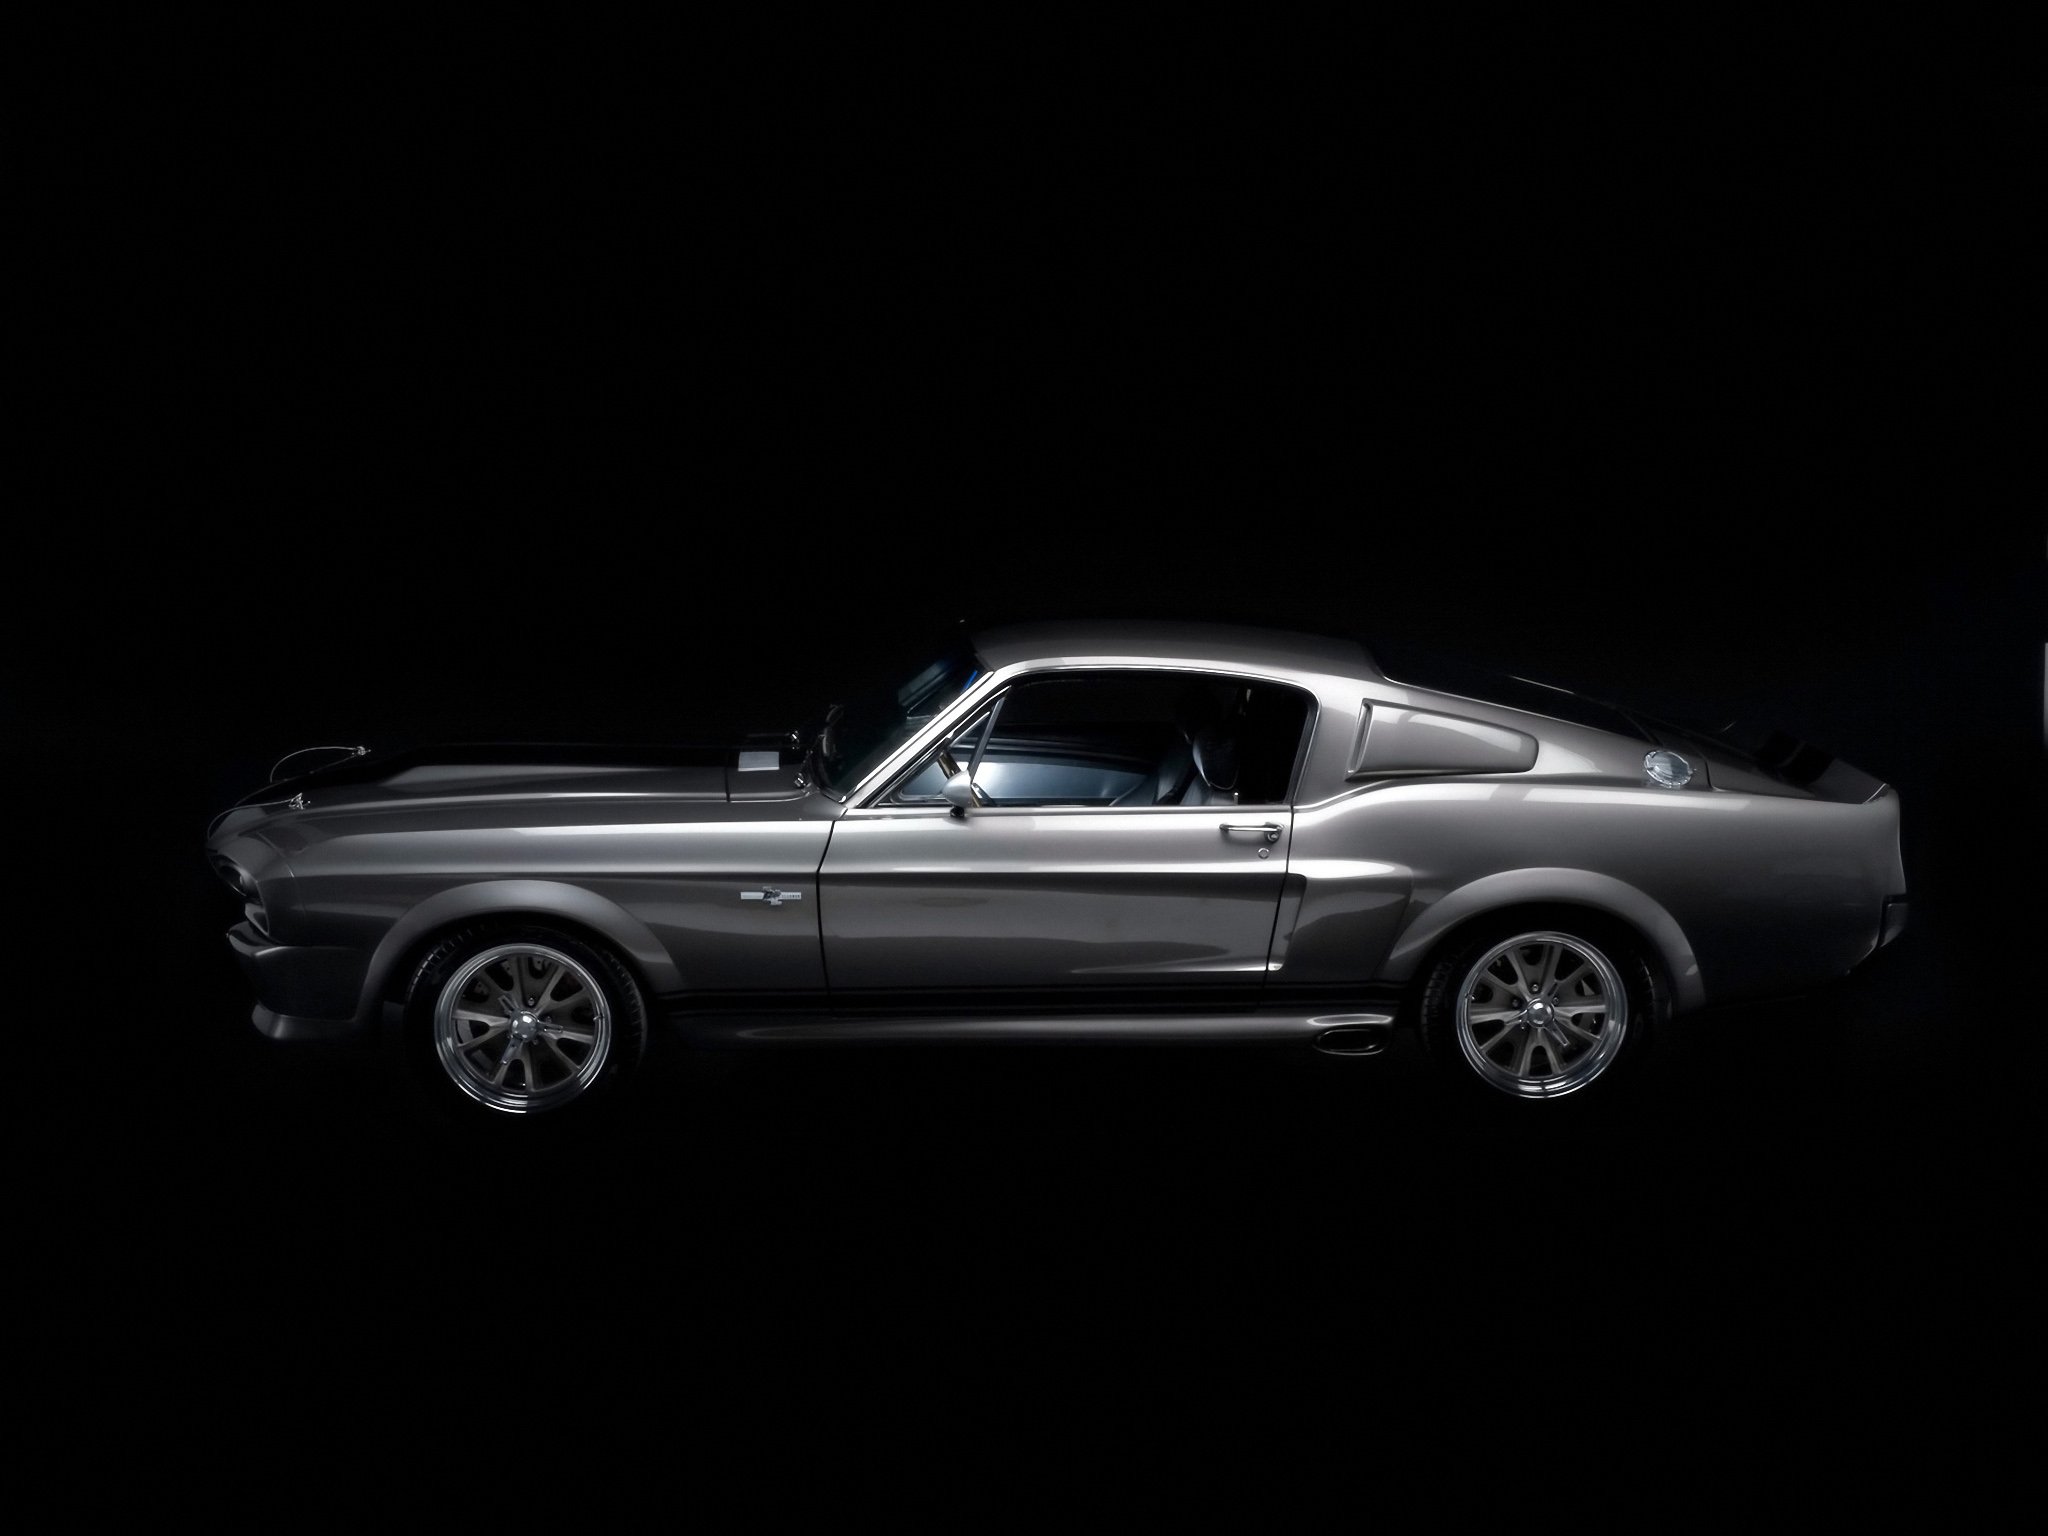 1967, Ford, Mustang, Shelby, Cobra, Gt500, Eleanor, Hot, Rod, Rods, Muscle, Classic, Rw Wallpaper